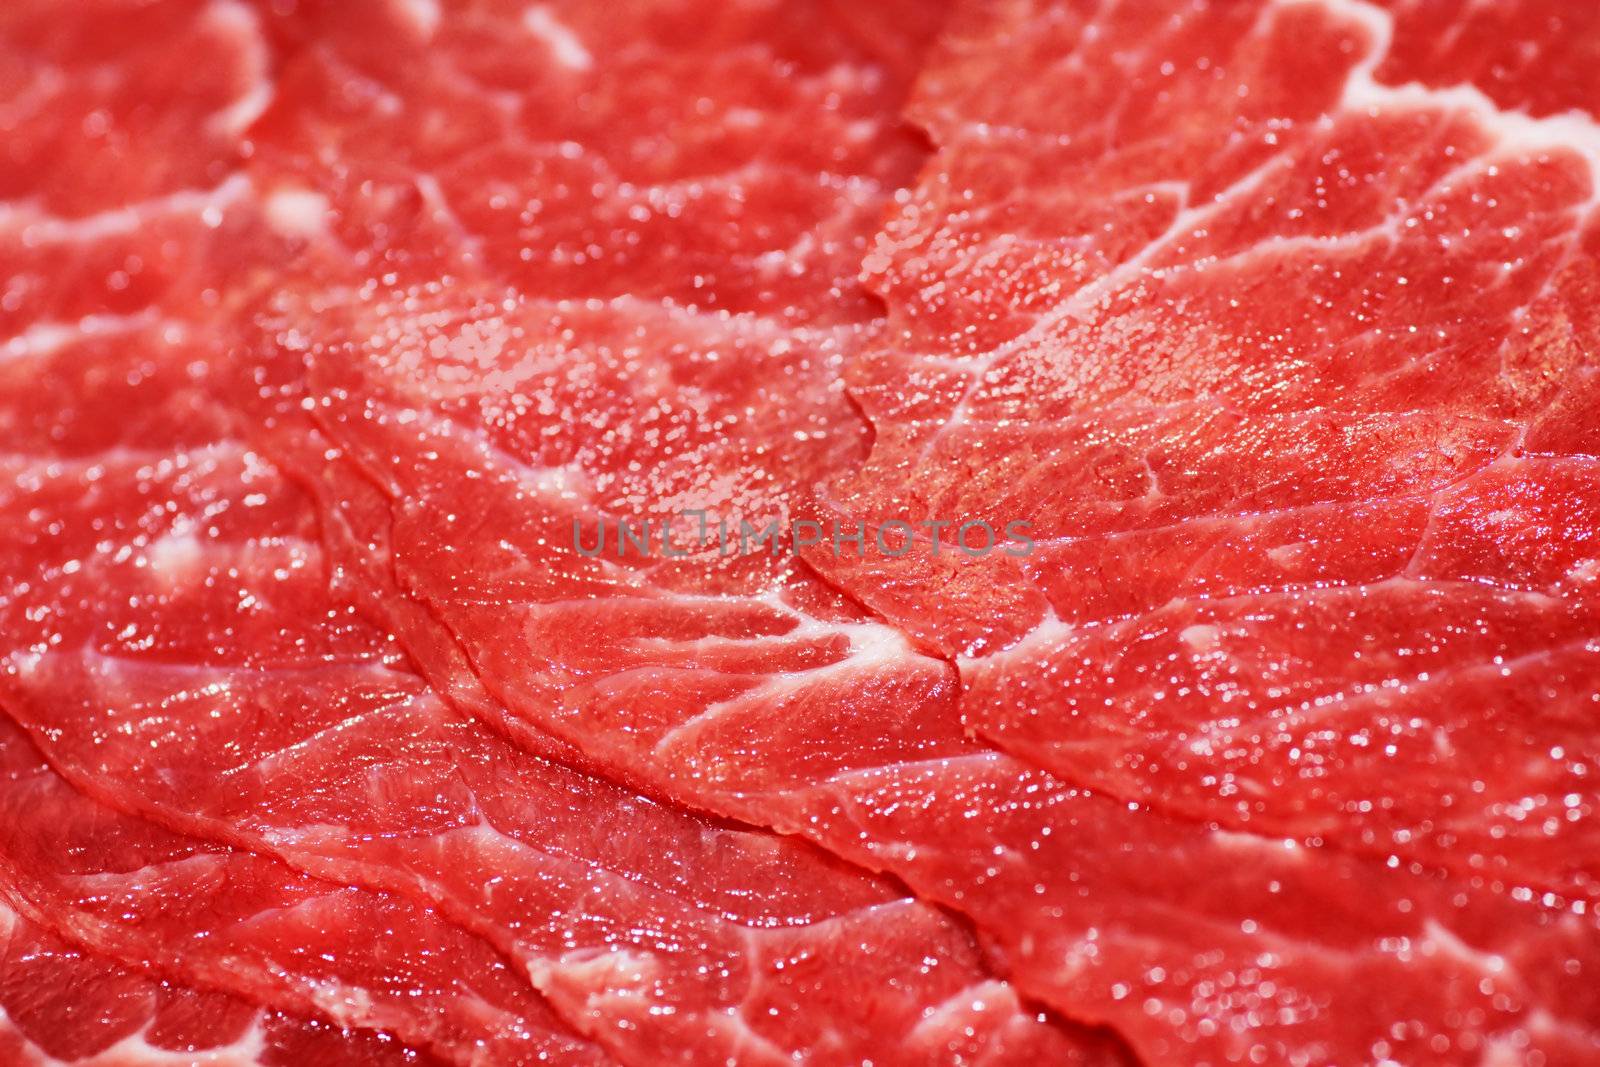 Thin slices of red meat by Mirage3